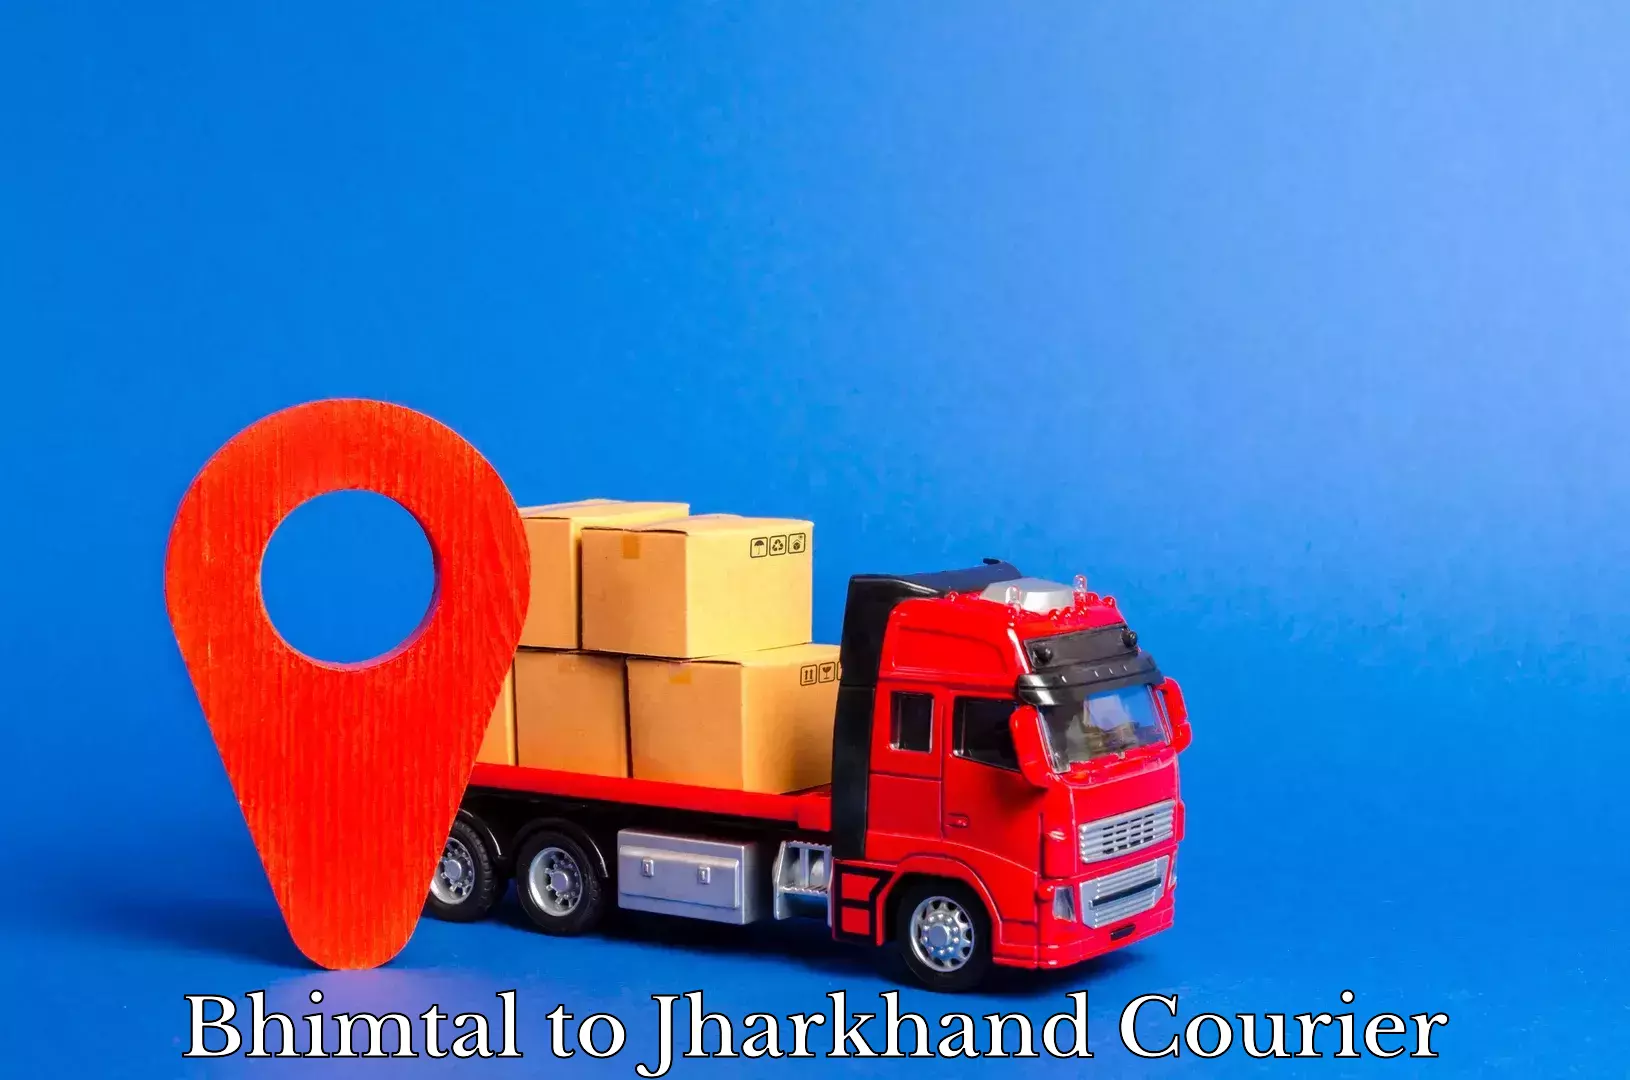 Package delivery network Bhimtal to Jharkhand